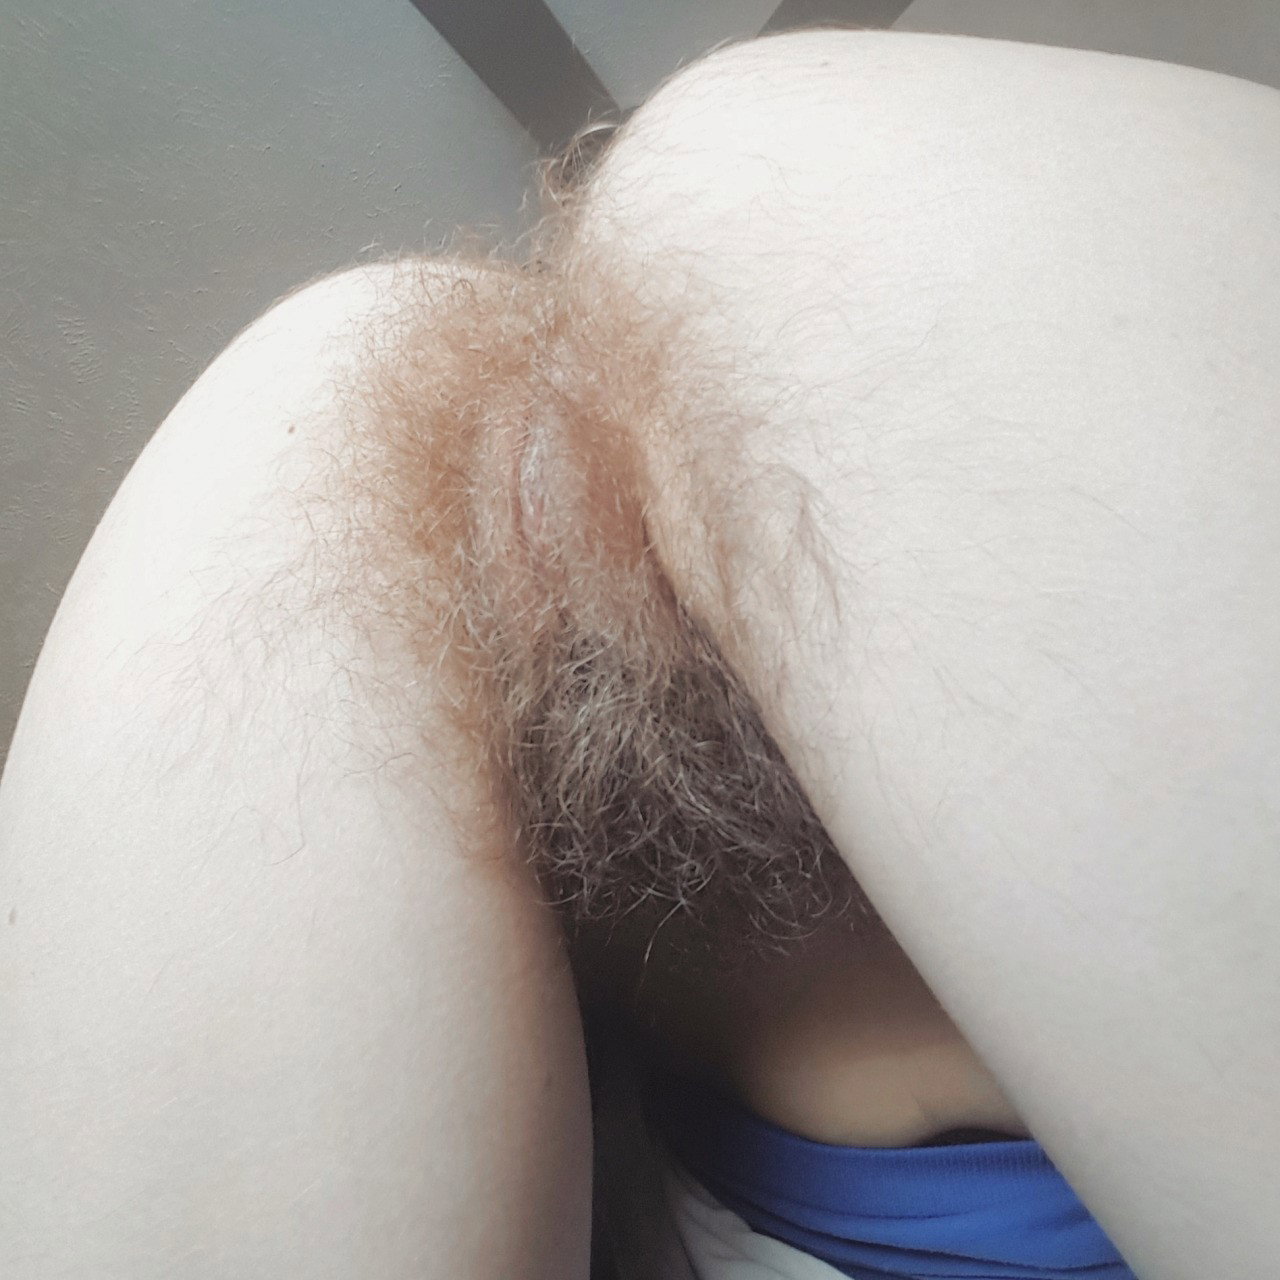 Photo by hairydolllover with the username @hairydolllover,  December 16, 2018 at 6:10 AM. The post is about the topic very hairy, sexy women and the text says 'Love a fluffy hot ass!'